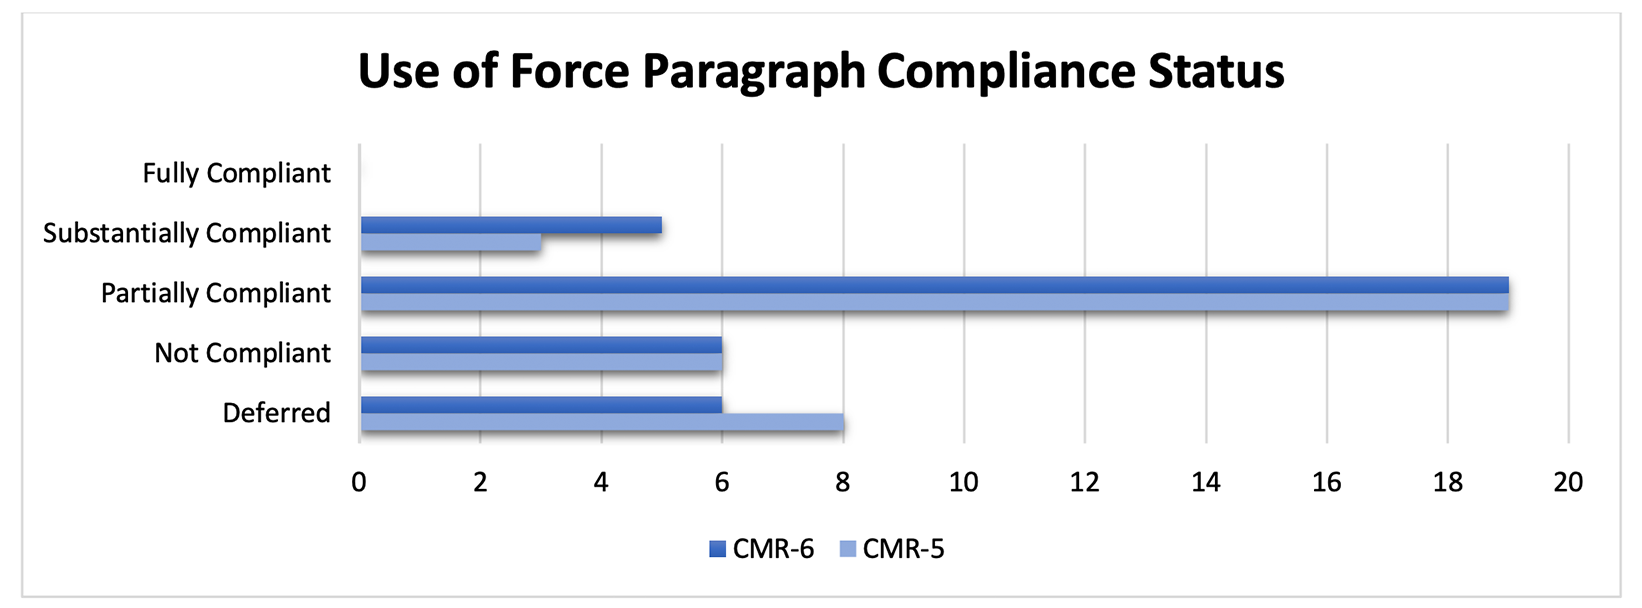 Figure 2. Use of Force: Paragraph Compliance Status